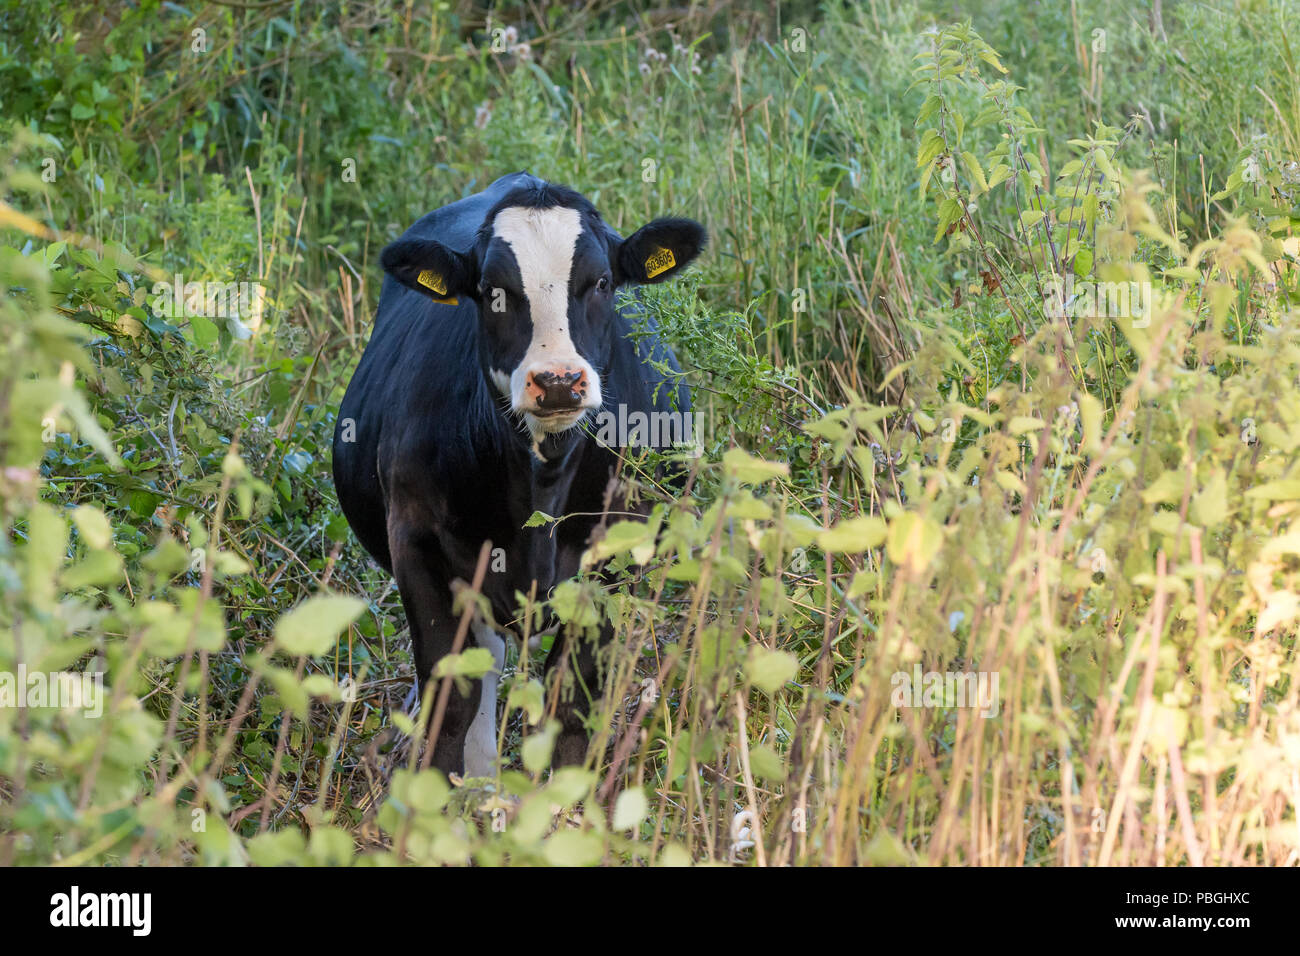 Black and white cow faces the camera through green plants, with yellow ear tags and black flies on its face Stock Photo